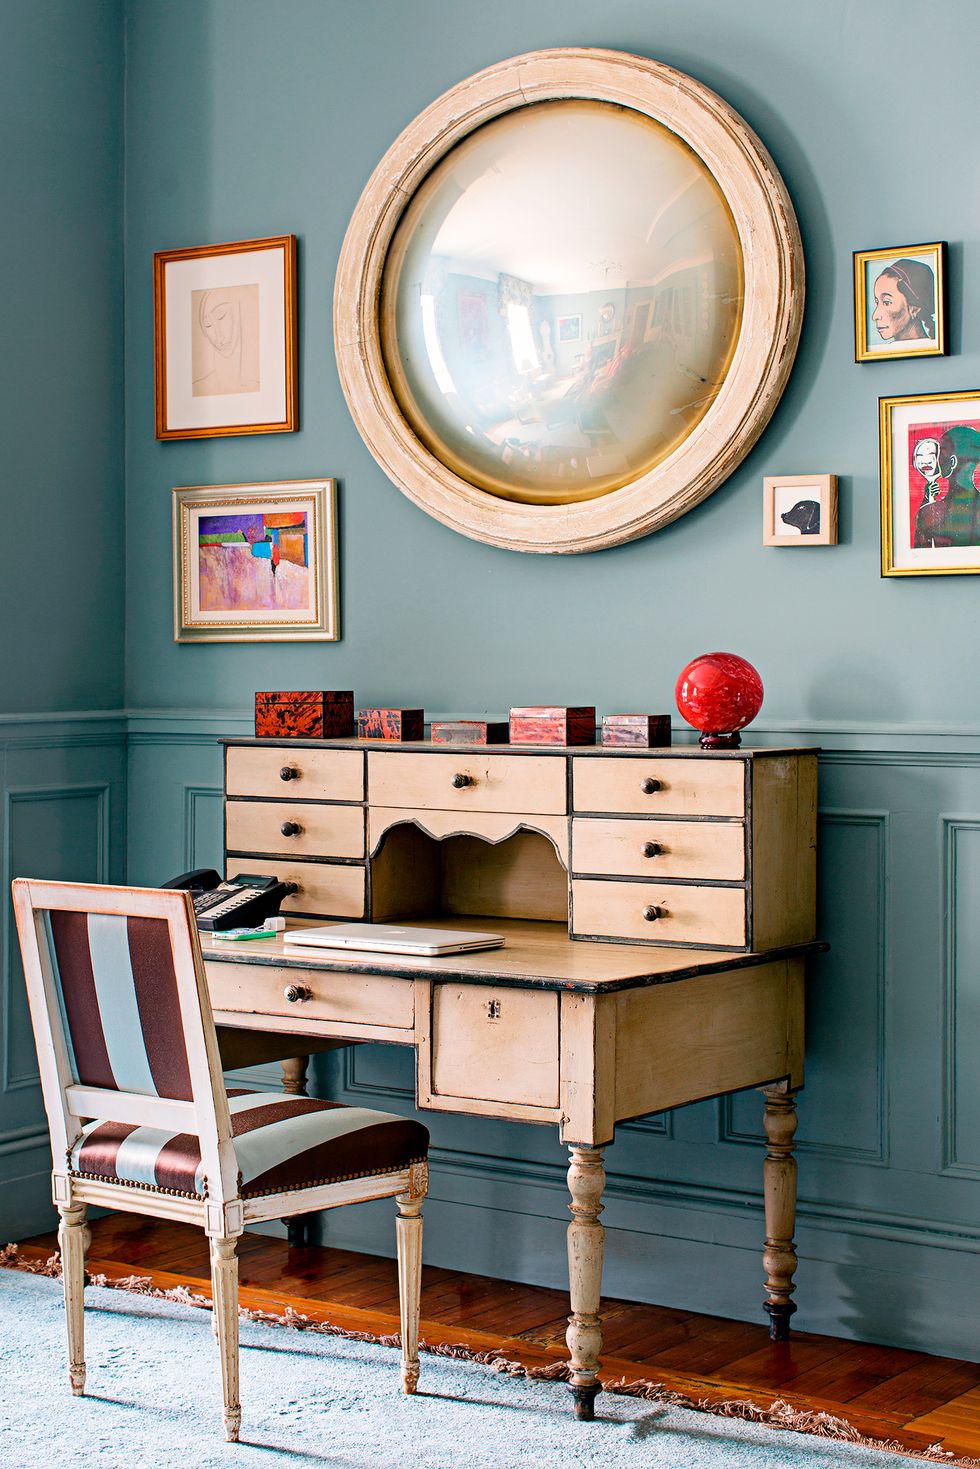 15 essentials for your home office makeover